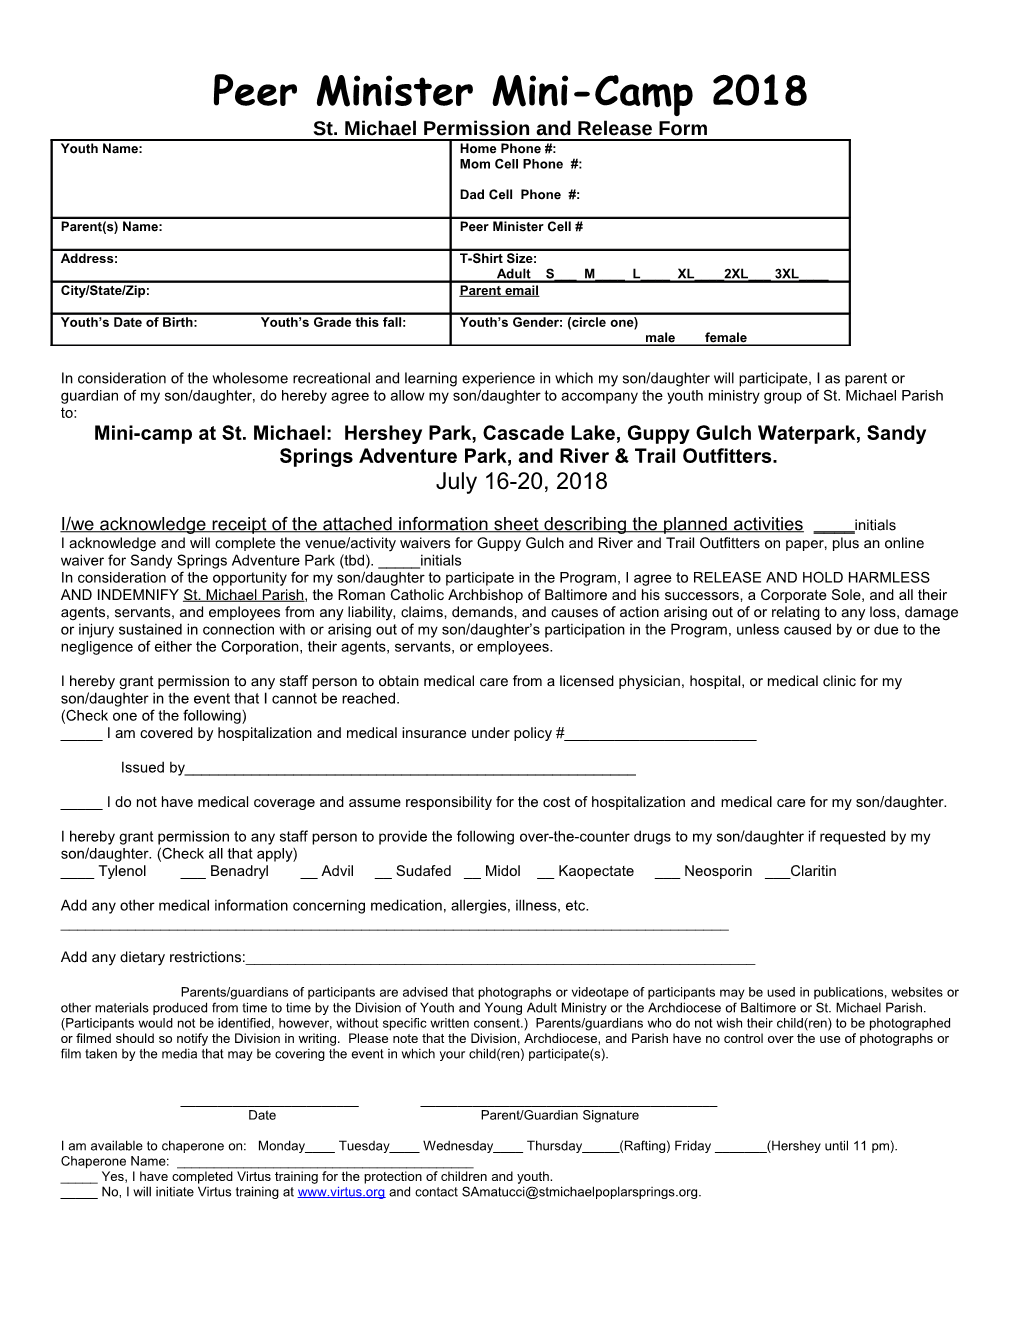 St. Michael Permission and Release Form